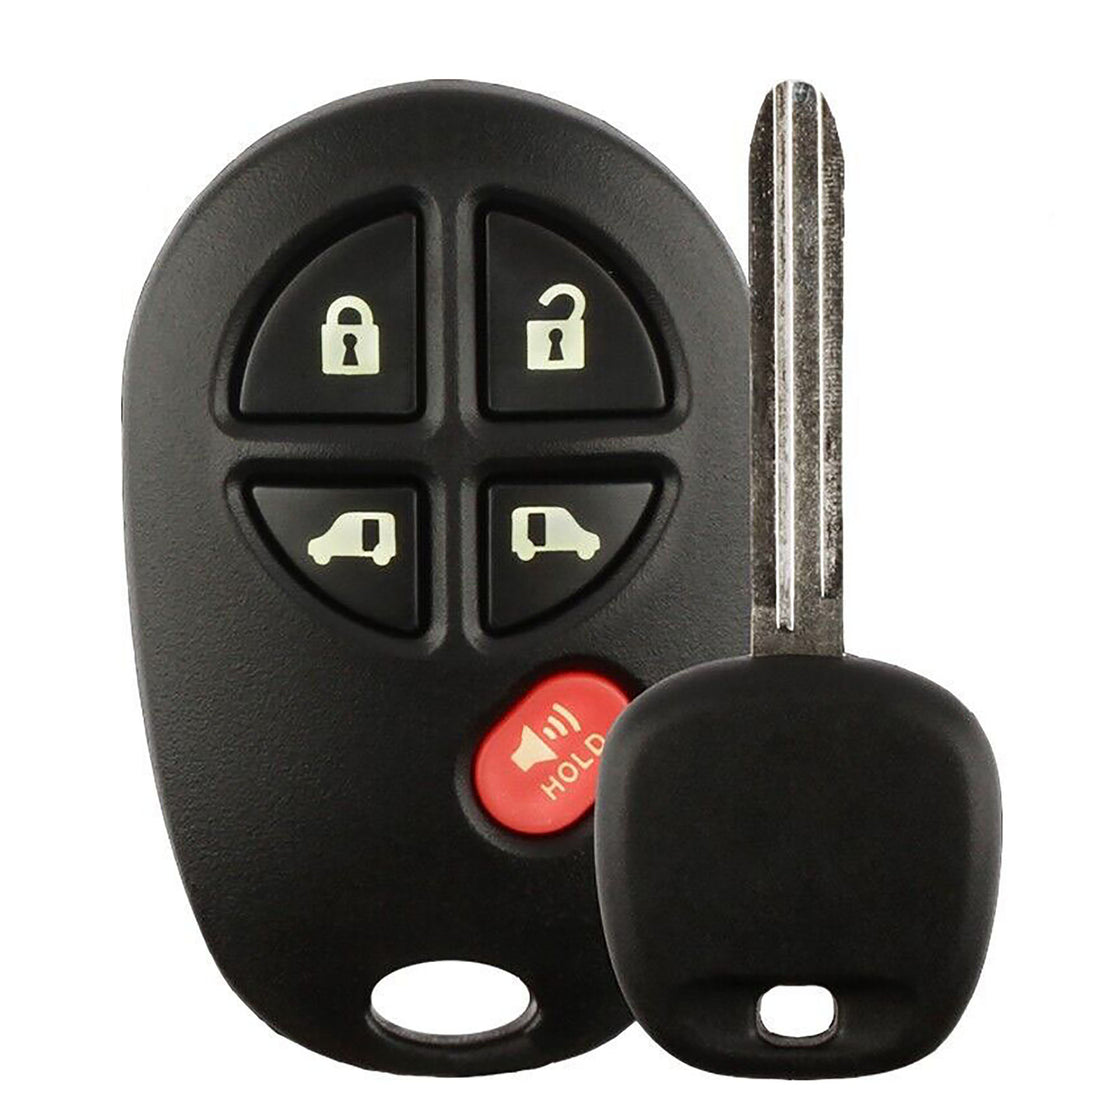 1x New Replacement Transponder Key Remote Compatible with & Fit For 2004-2010 Toyota Sienna - Dot chip - MPN TOY44D-PT-C-06